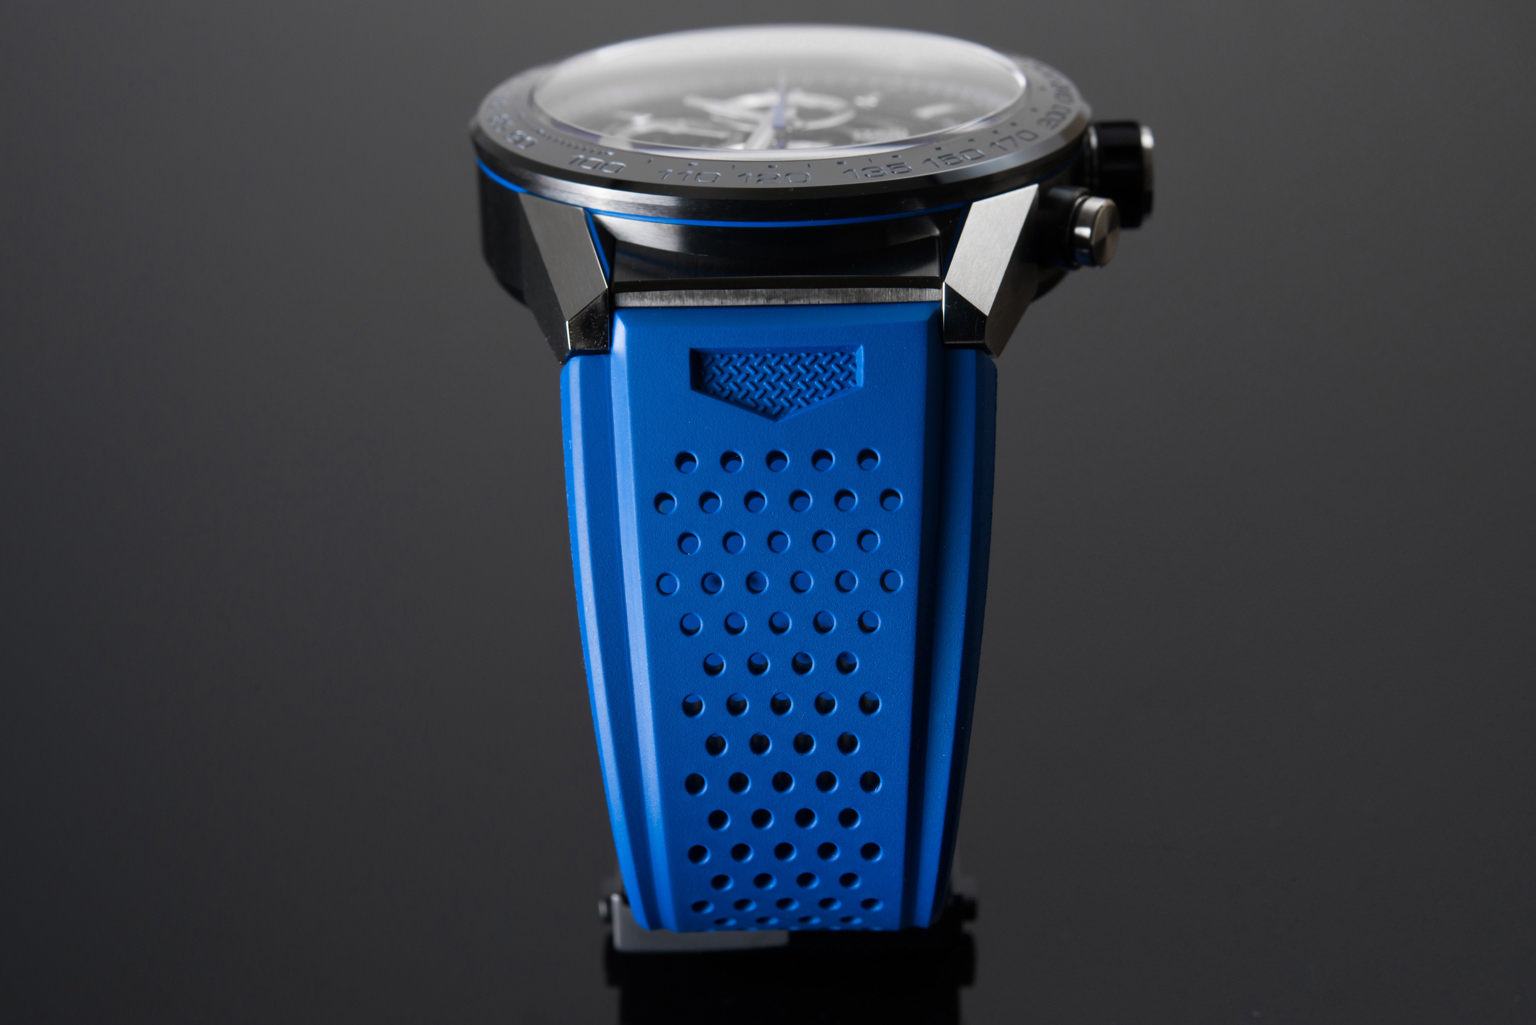 TAG Heuer Carrera Heuer-01 45mm Blue Touch Edition CAR2A1T